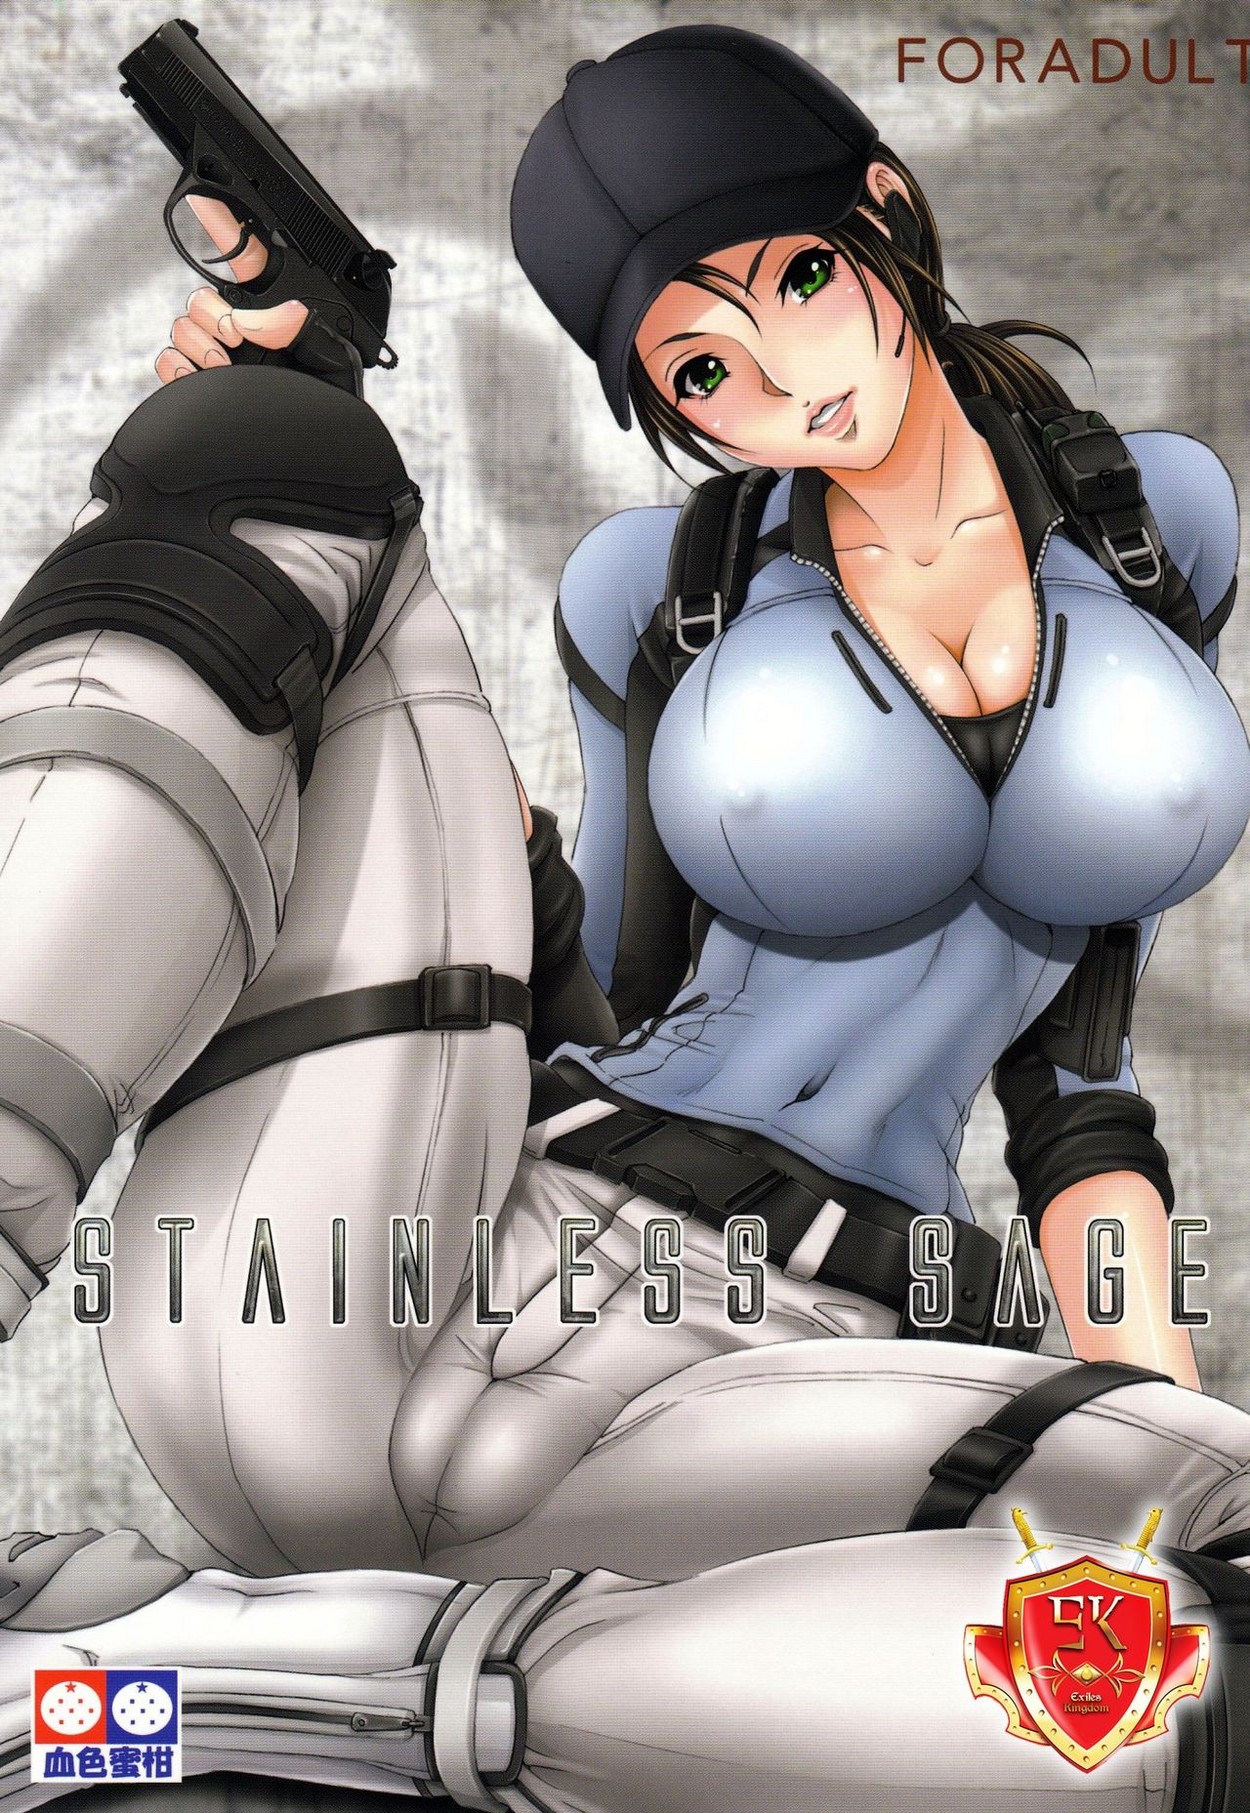 Stainless Sage – Resident Evil - daa304e957f2f9bb782734a549c3929e